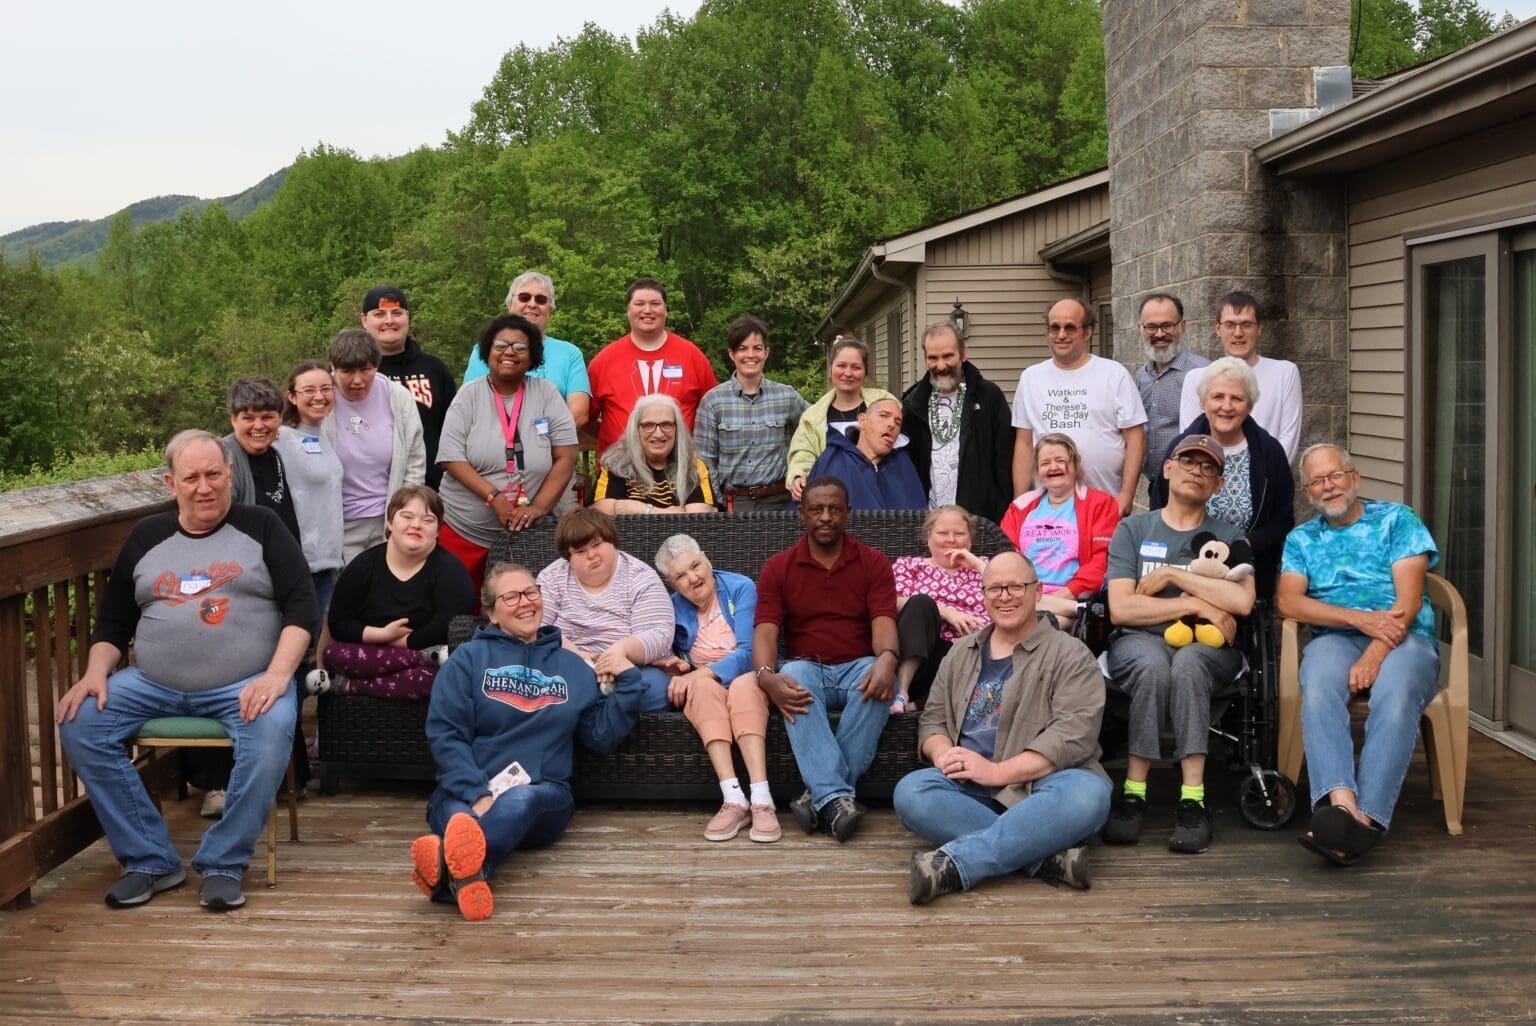 Members of Faith & Light attending their retreat pose for a group picture on the back deck of the lodge.